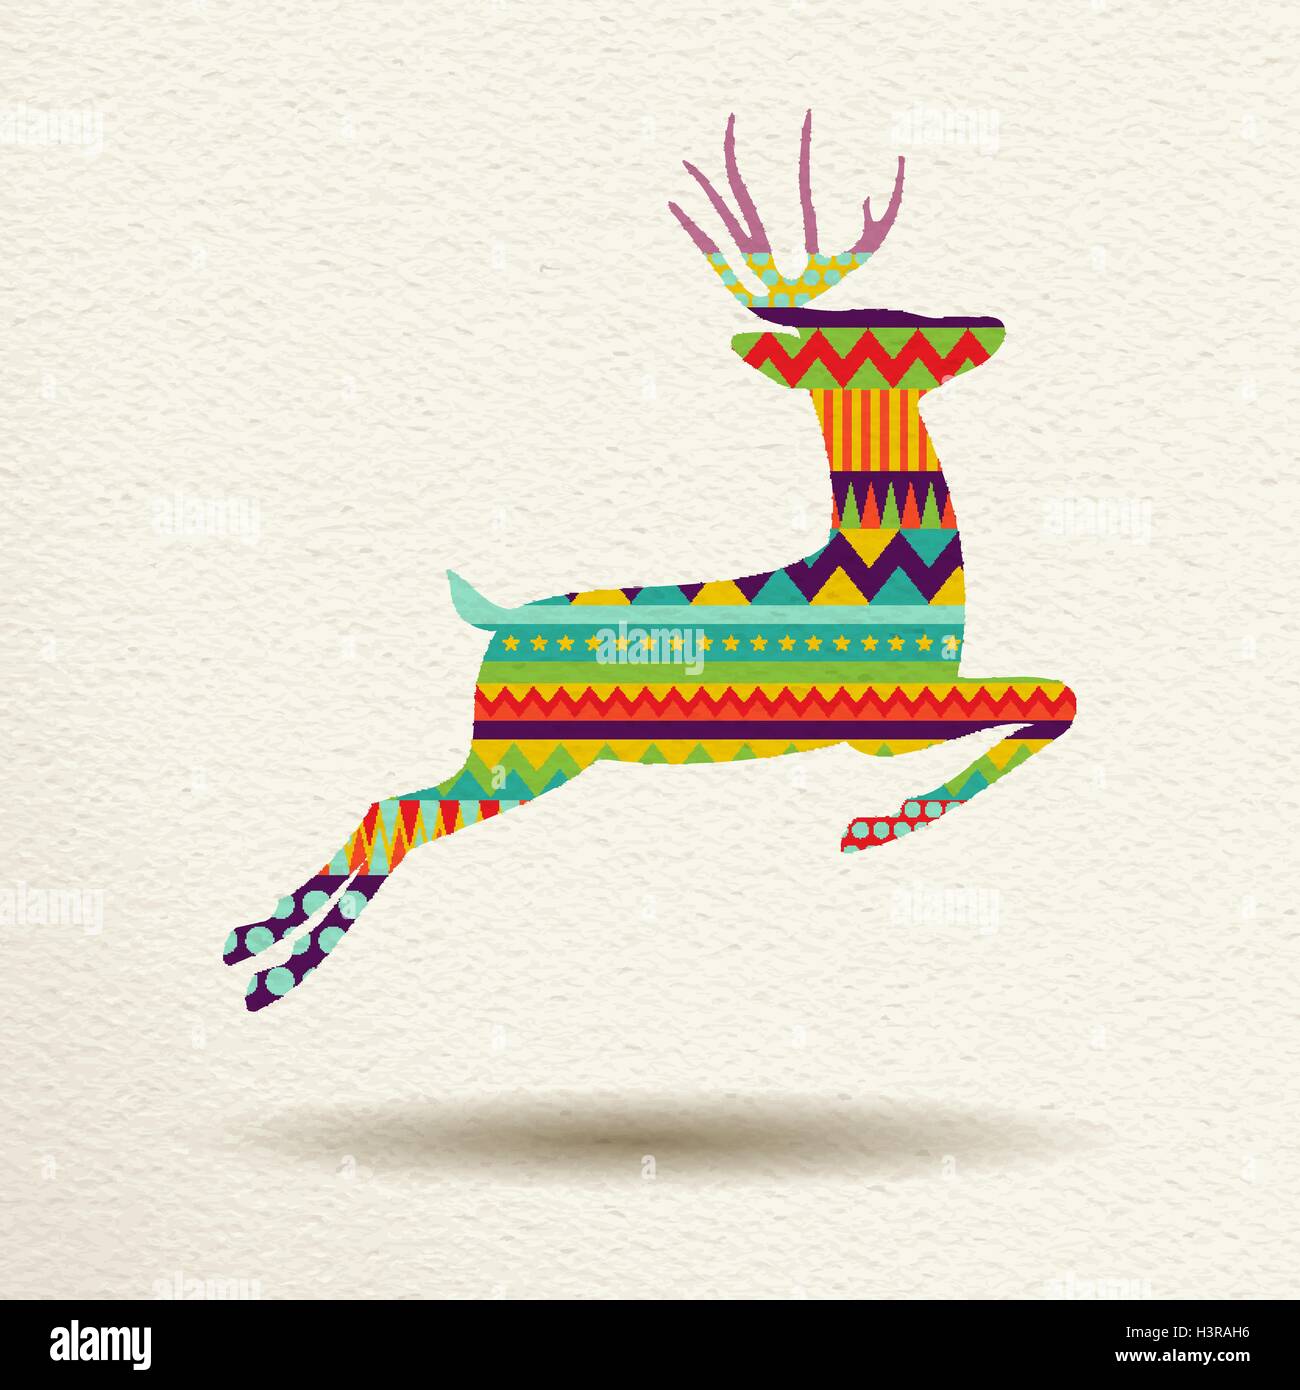 Merry Christmas jumping deer in fun happy colors with abstract geometric shapes, concept holiday design. EPS10 vector. Stock Vector